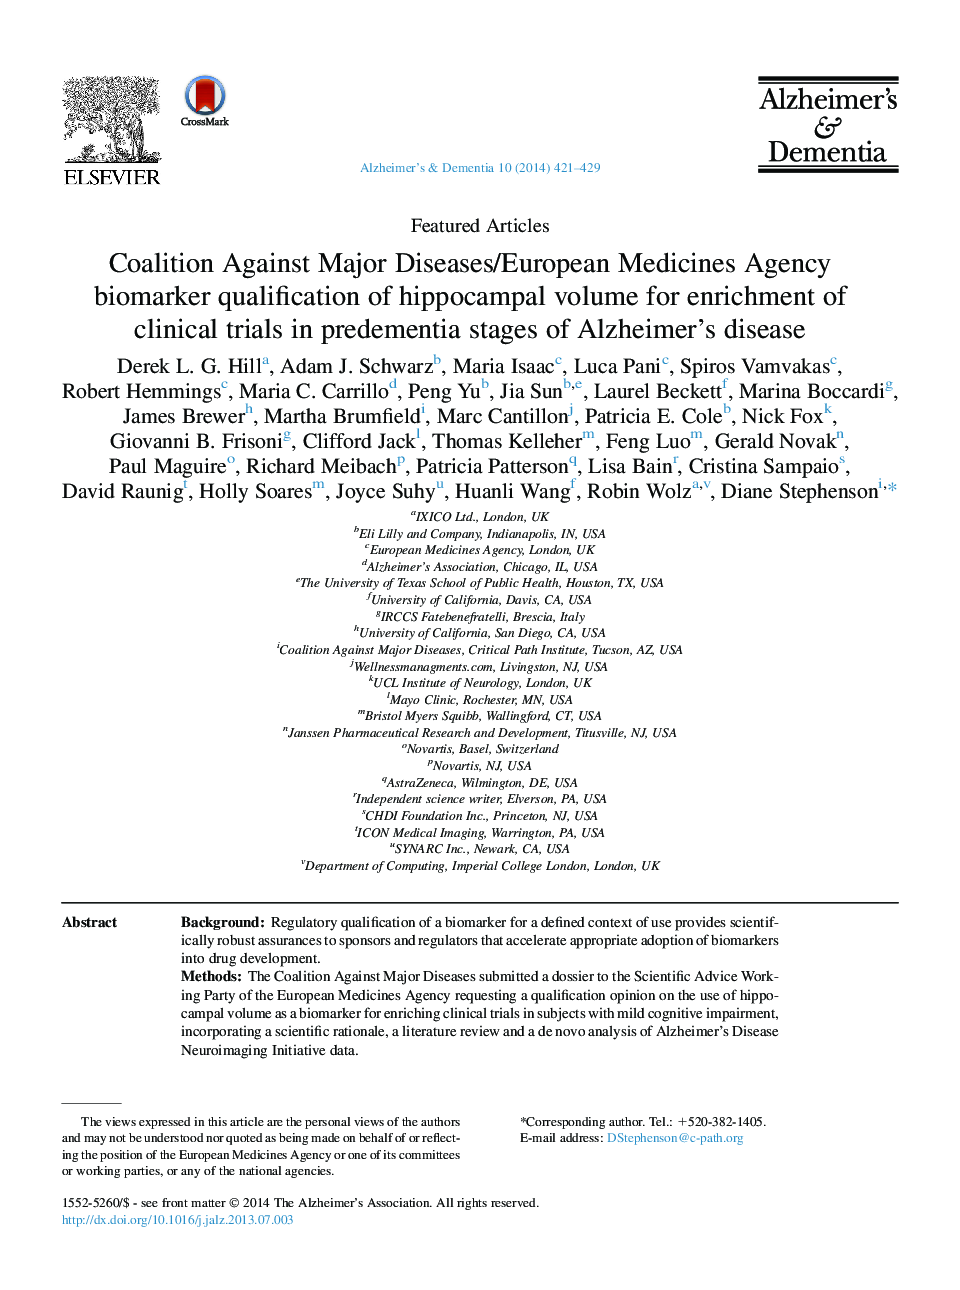 Featured ArticleCoalition Against Major Diseases/European Medicines Agency biomarker qualification of hippocampal volume for enrichment of clinical trials in predementia stages of Alzheimer's disease